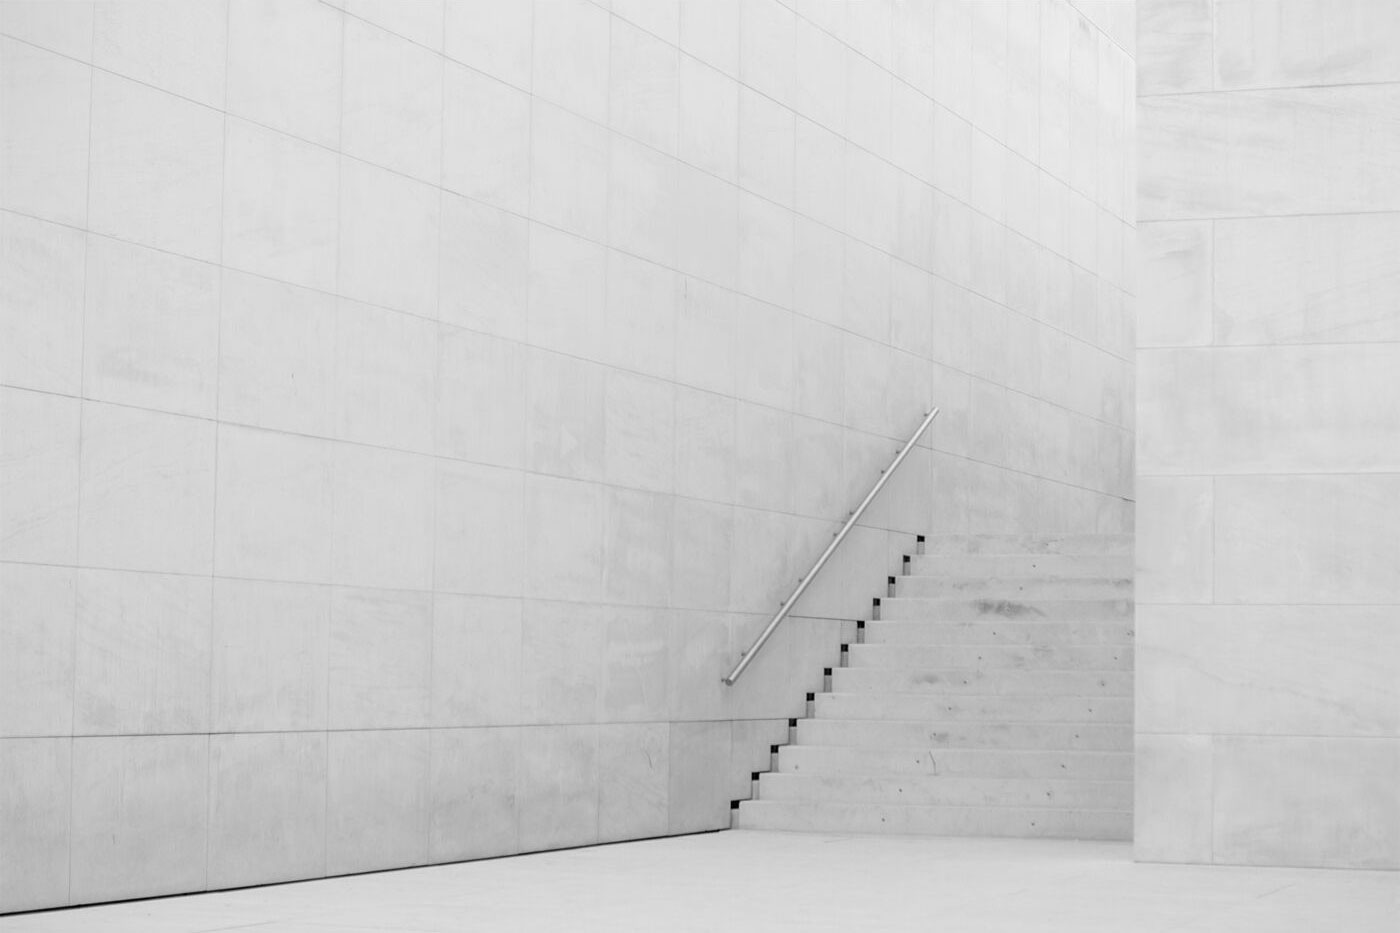 Perspective View of a Big Wall with Stairs Mockup FREE PSD